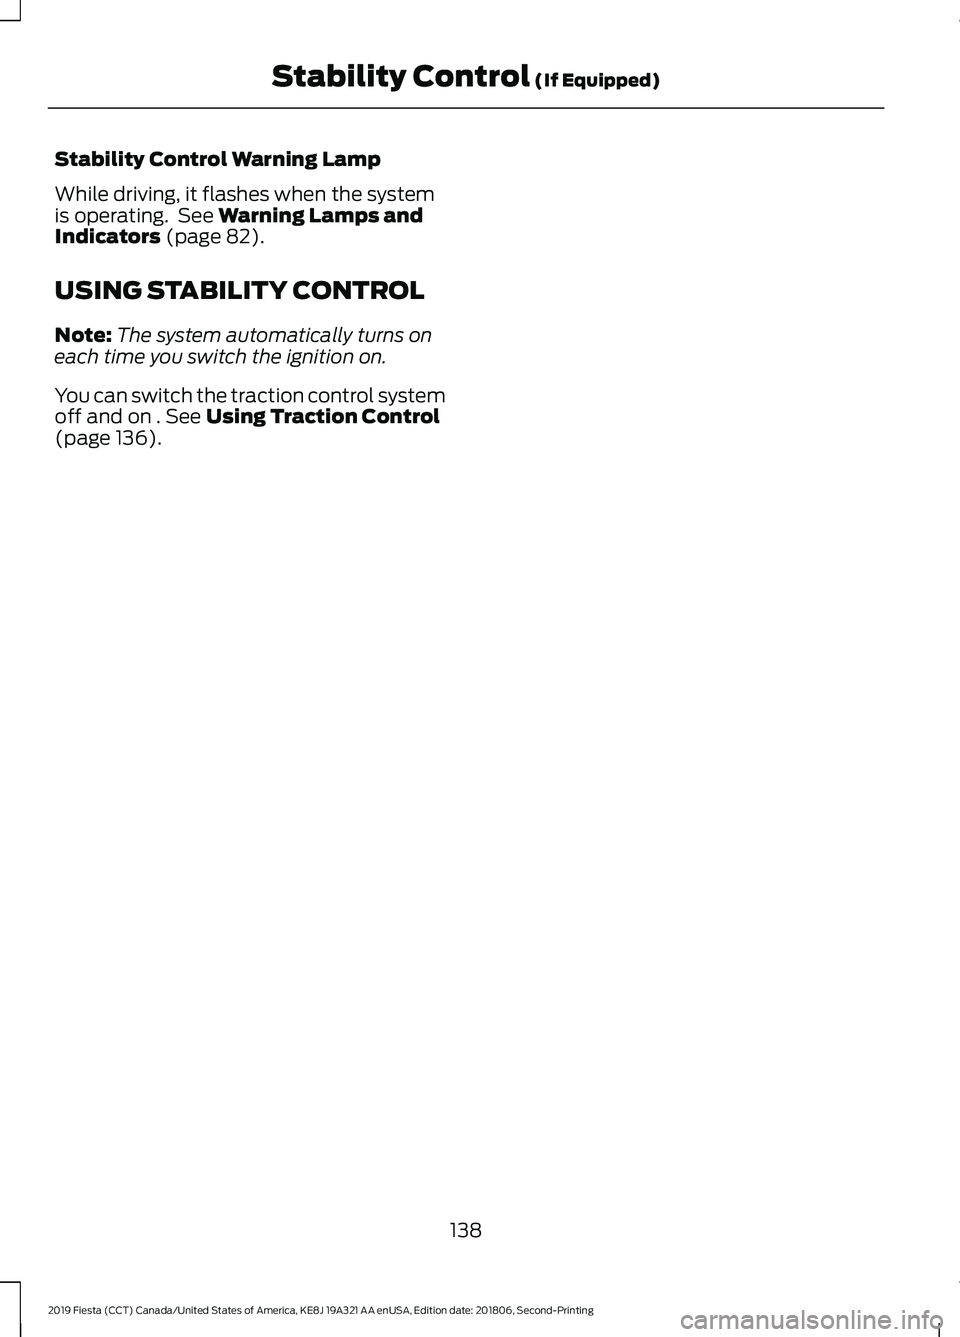 FORD FIESTA 2019  Owners Manual Stability Control Warning Lamp
While driving, it flashes when the system
is operating.  See Warning Lamps and
Indicators (page 82).
USING STABILITY CONTROL
Note: The system automatically turns on
each